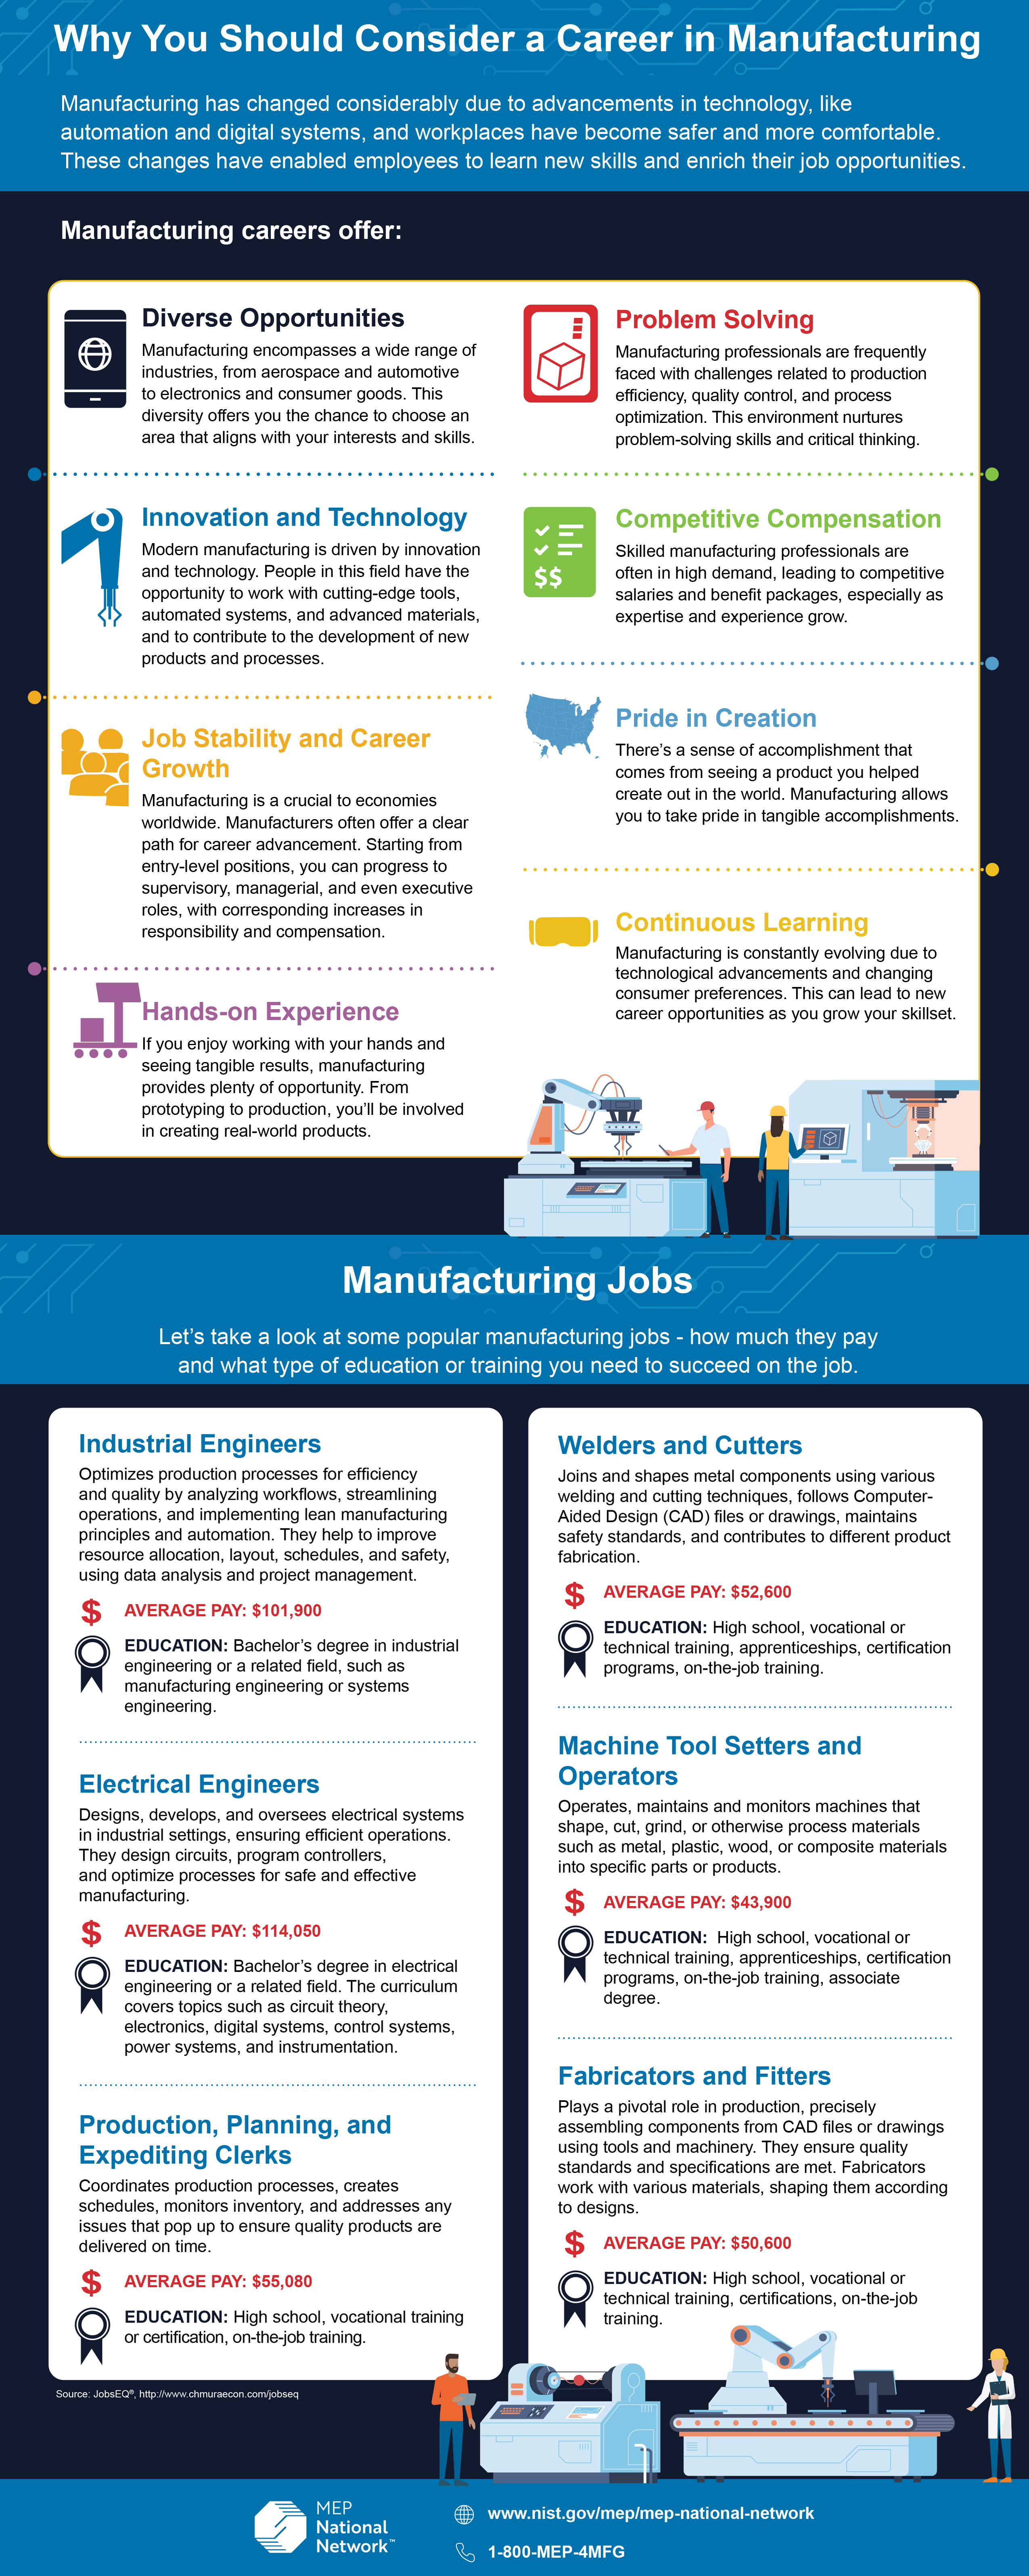 Why You Should Consider a Career in Manufacturing